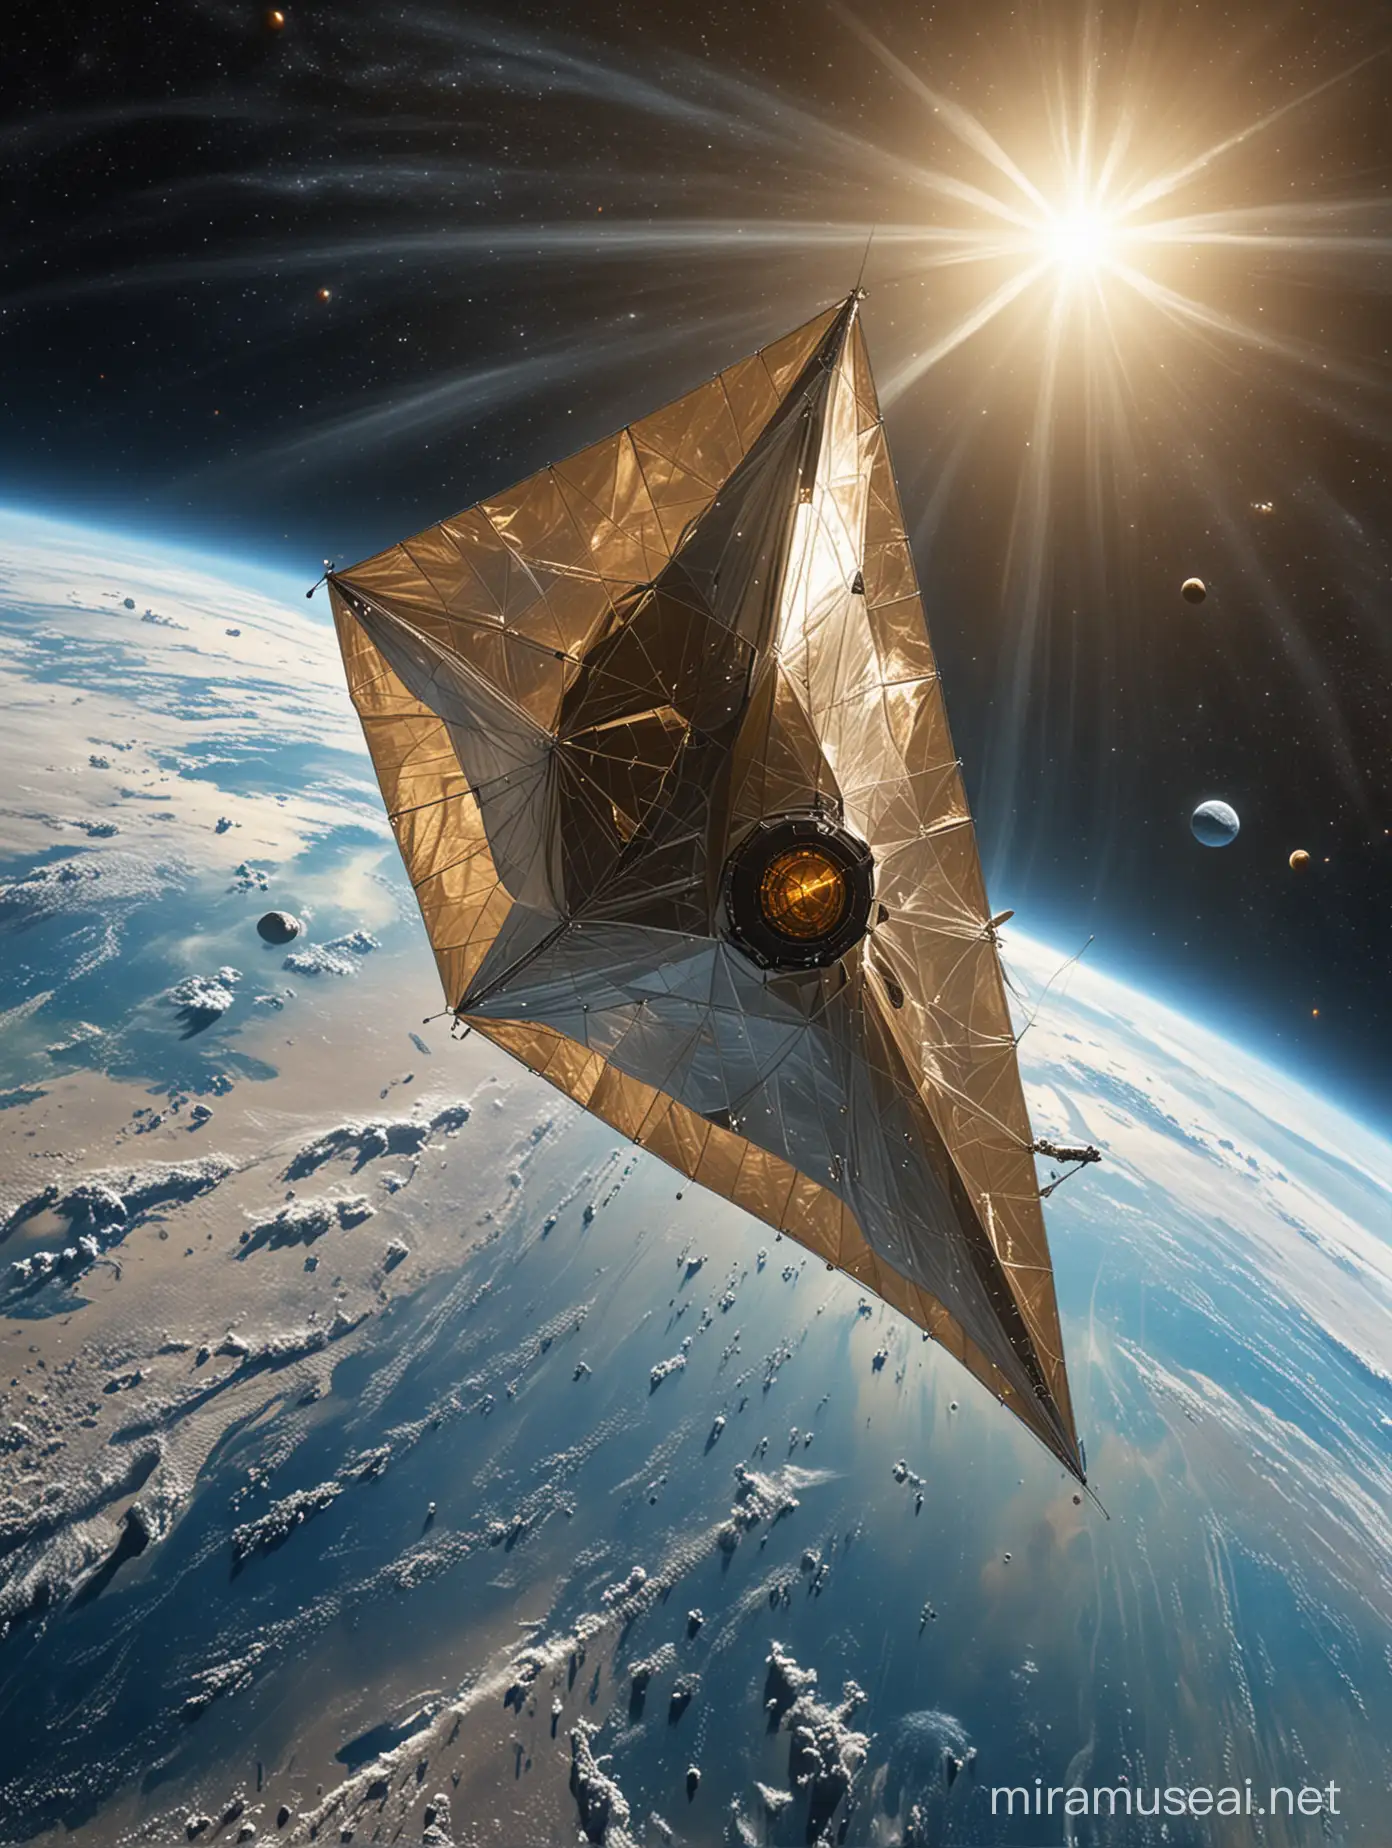 Highly detailed painting, wide view from the side, the (((Sunjammer solar sail spacecraft orbiting the Earth))), Sunjammer has its sails deployed in a square shape, use muted pastel colors only, high quality
